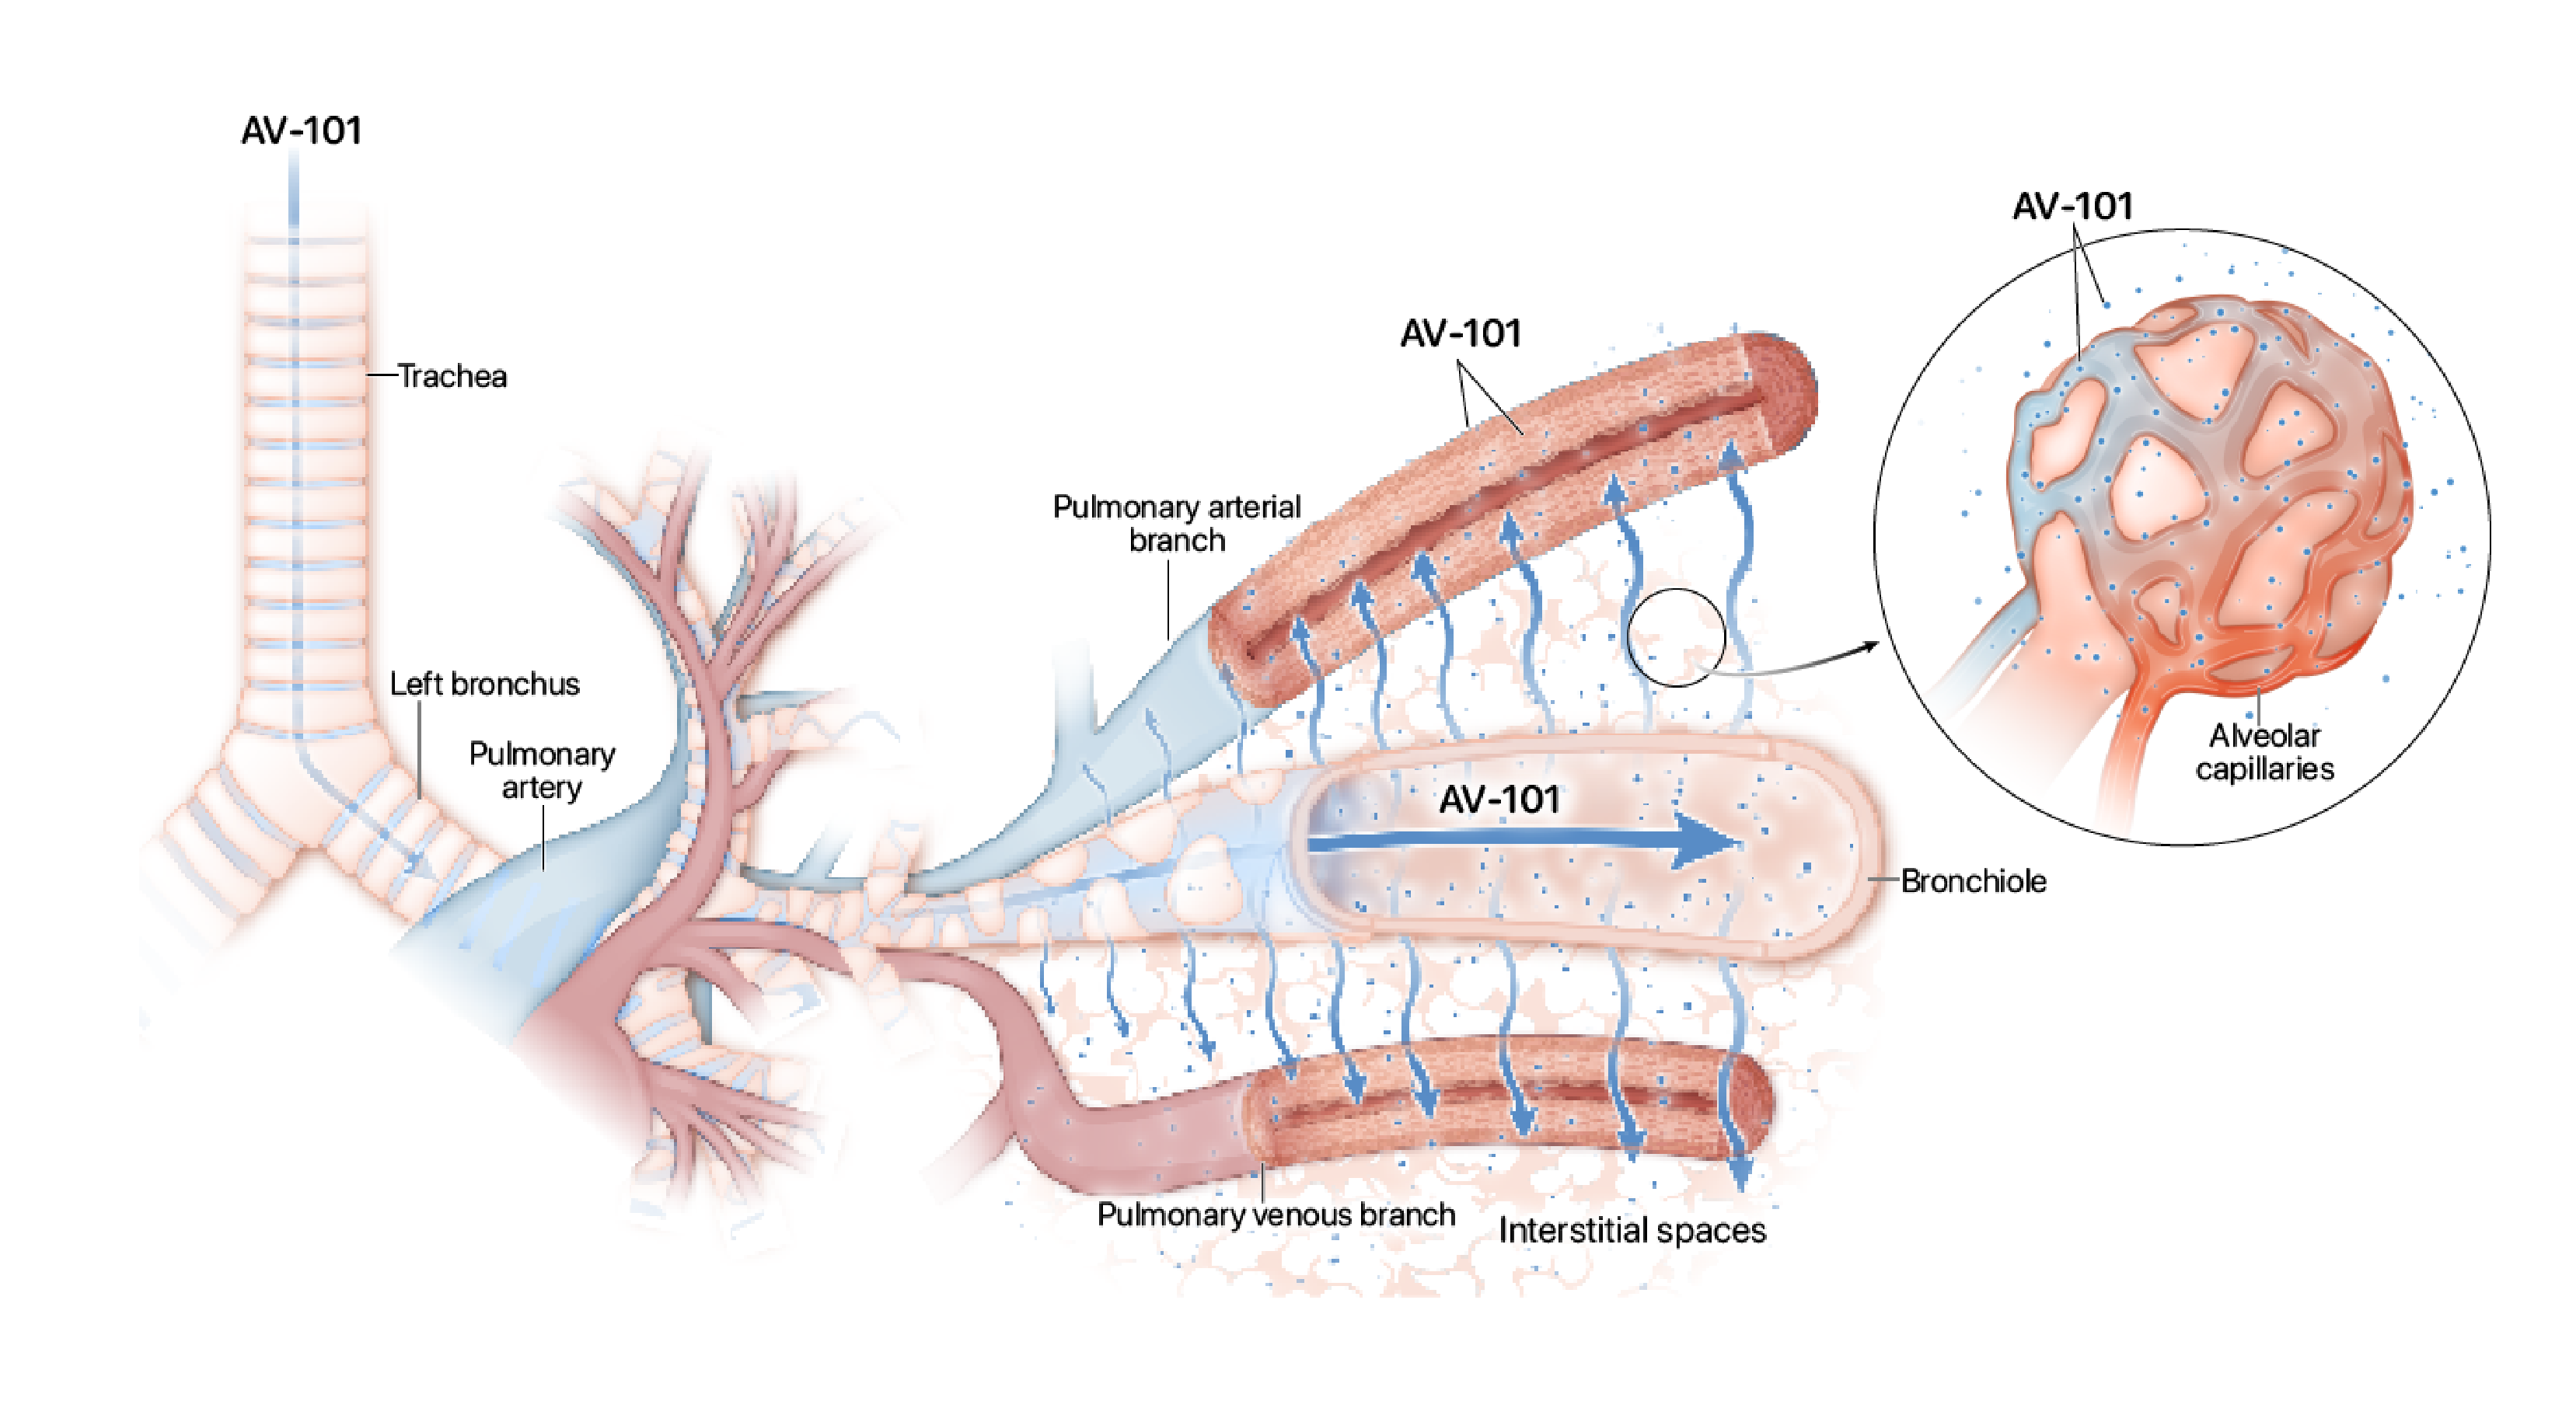 AV-101 delivering imatinib throughout the airways, permeating the lung and reaching the surrounding tissue and blood vessels